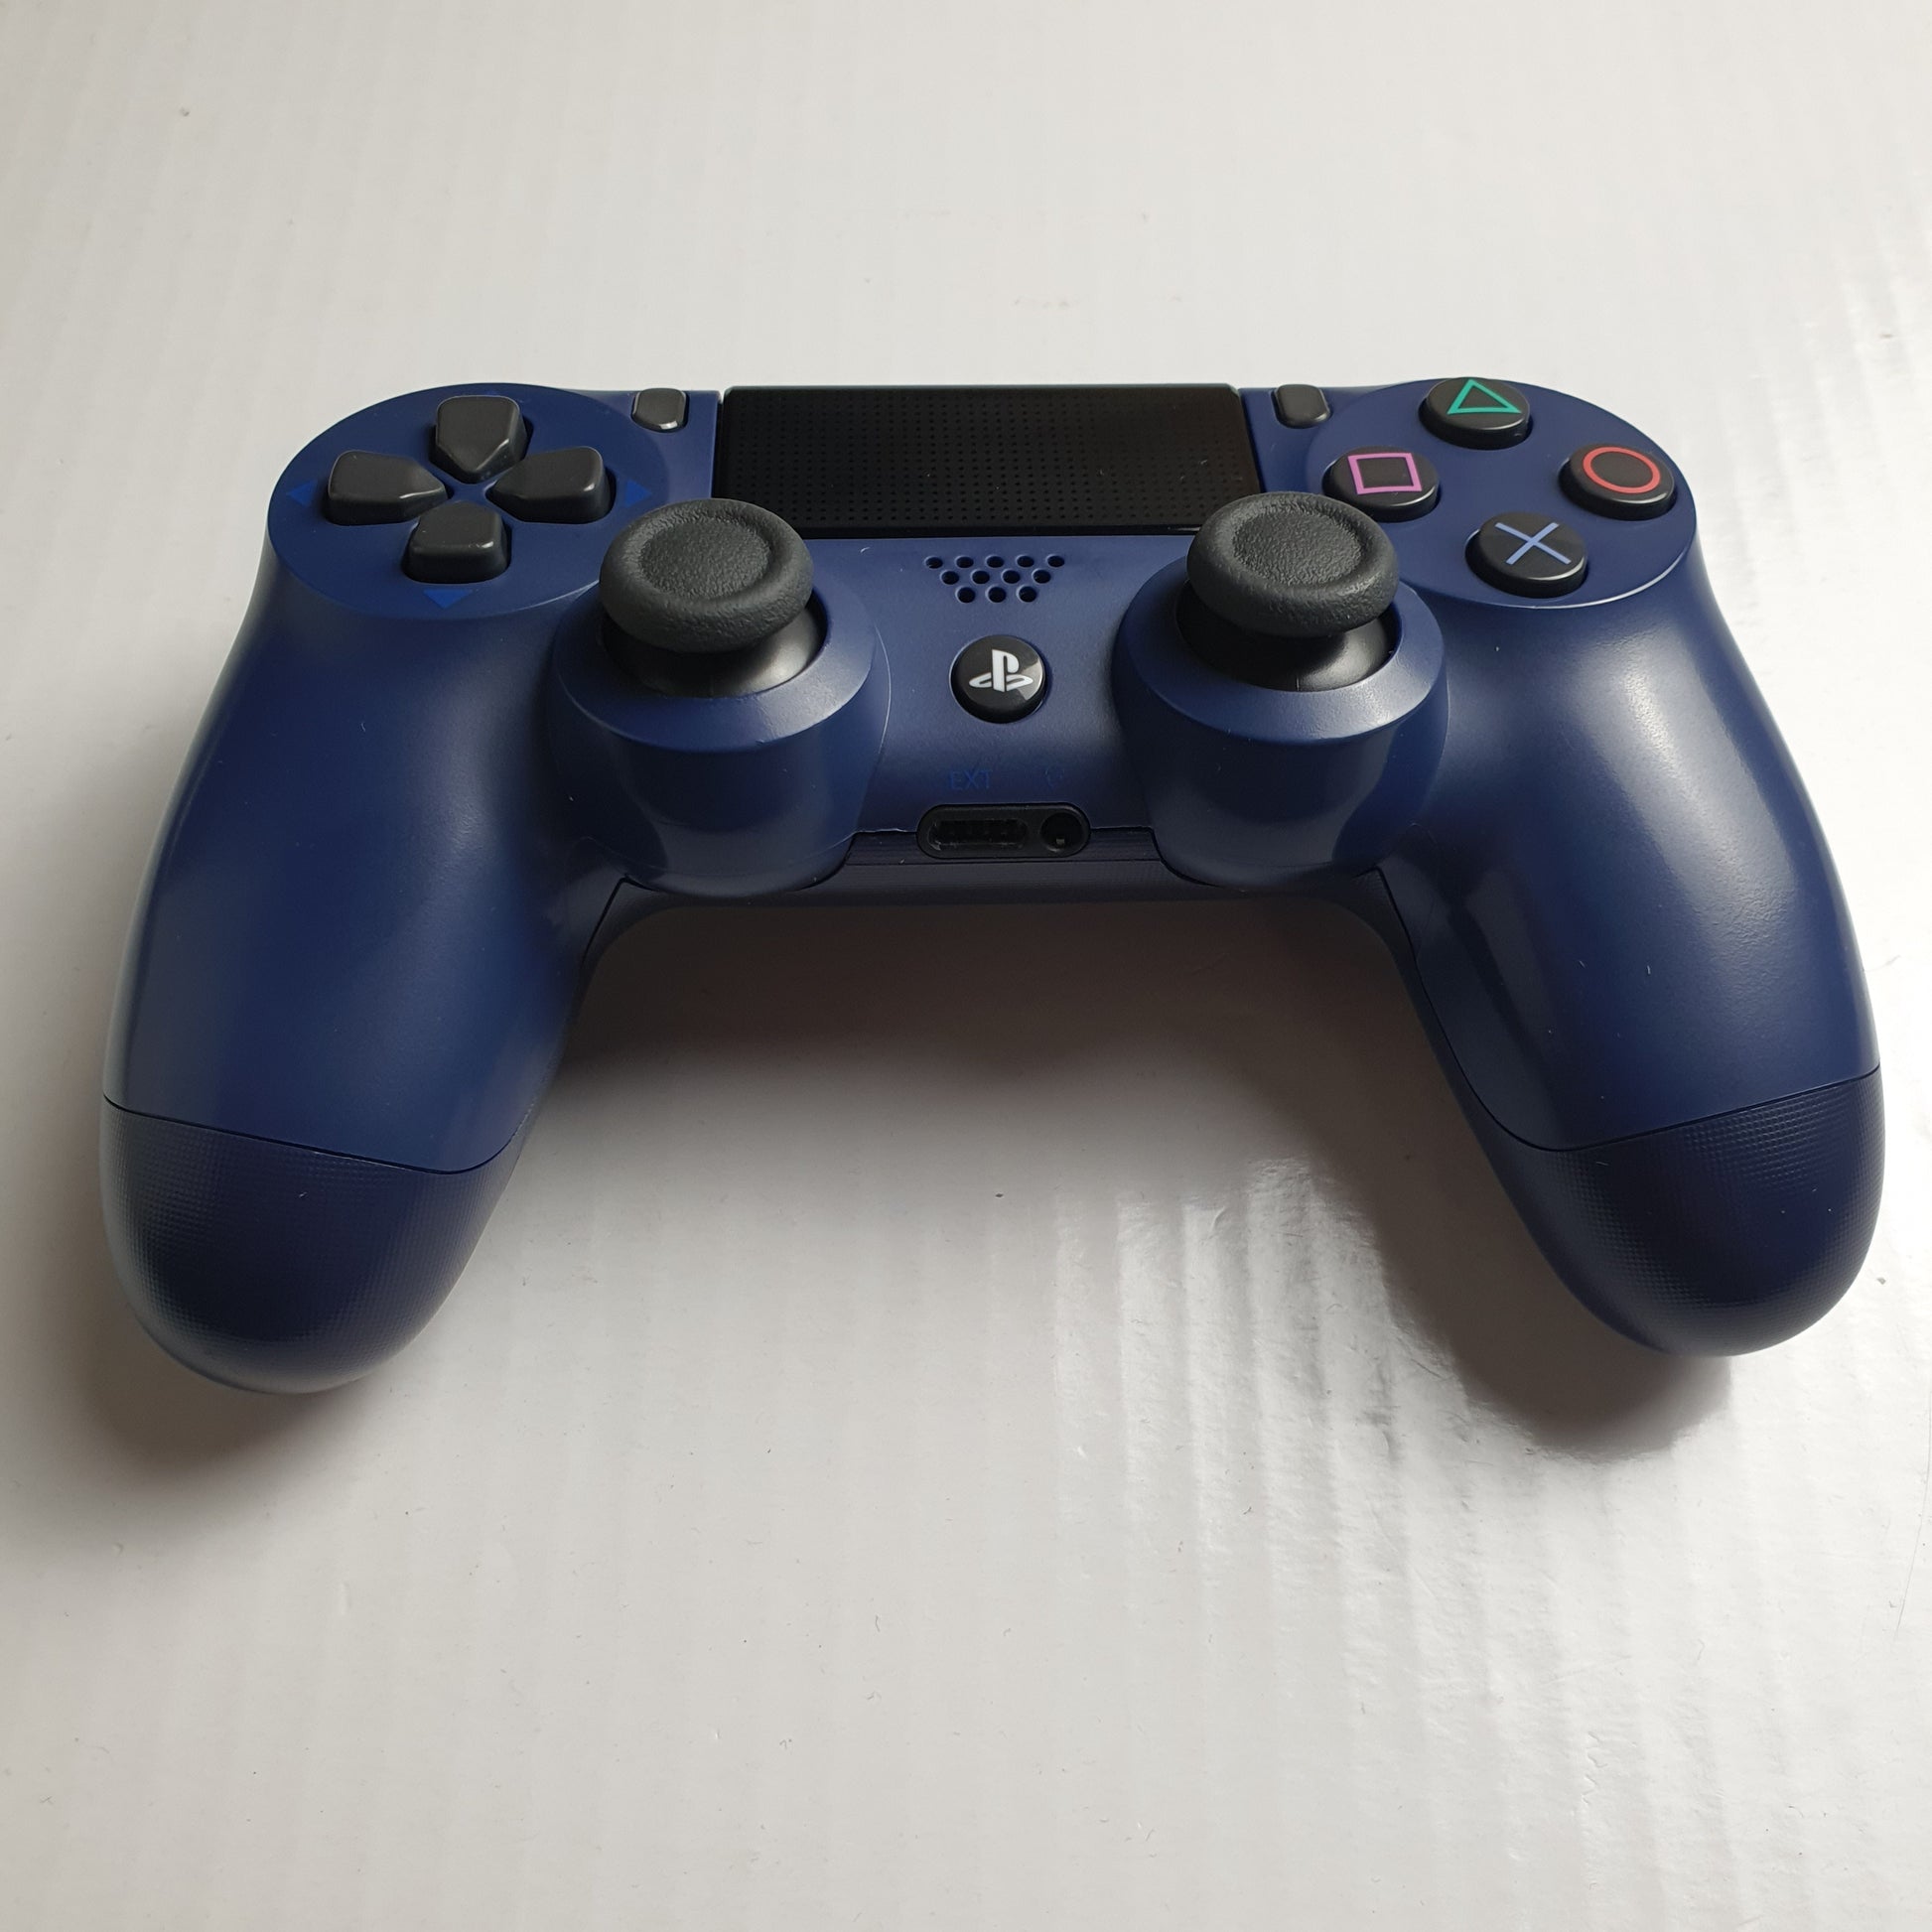 DualShock 4 Wireless Controller for PlayStation 4 - Midnight Blue